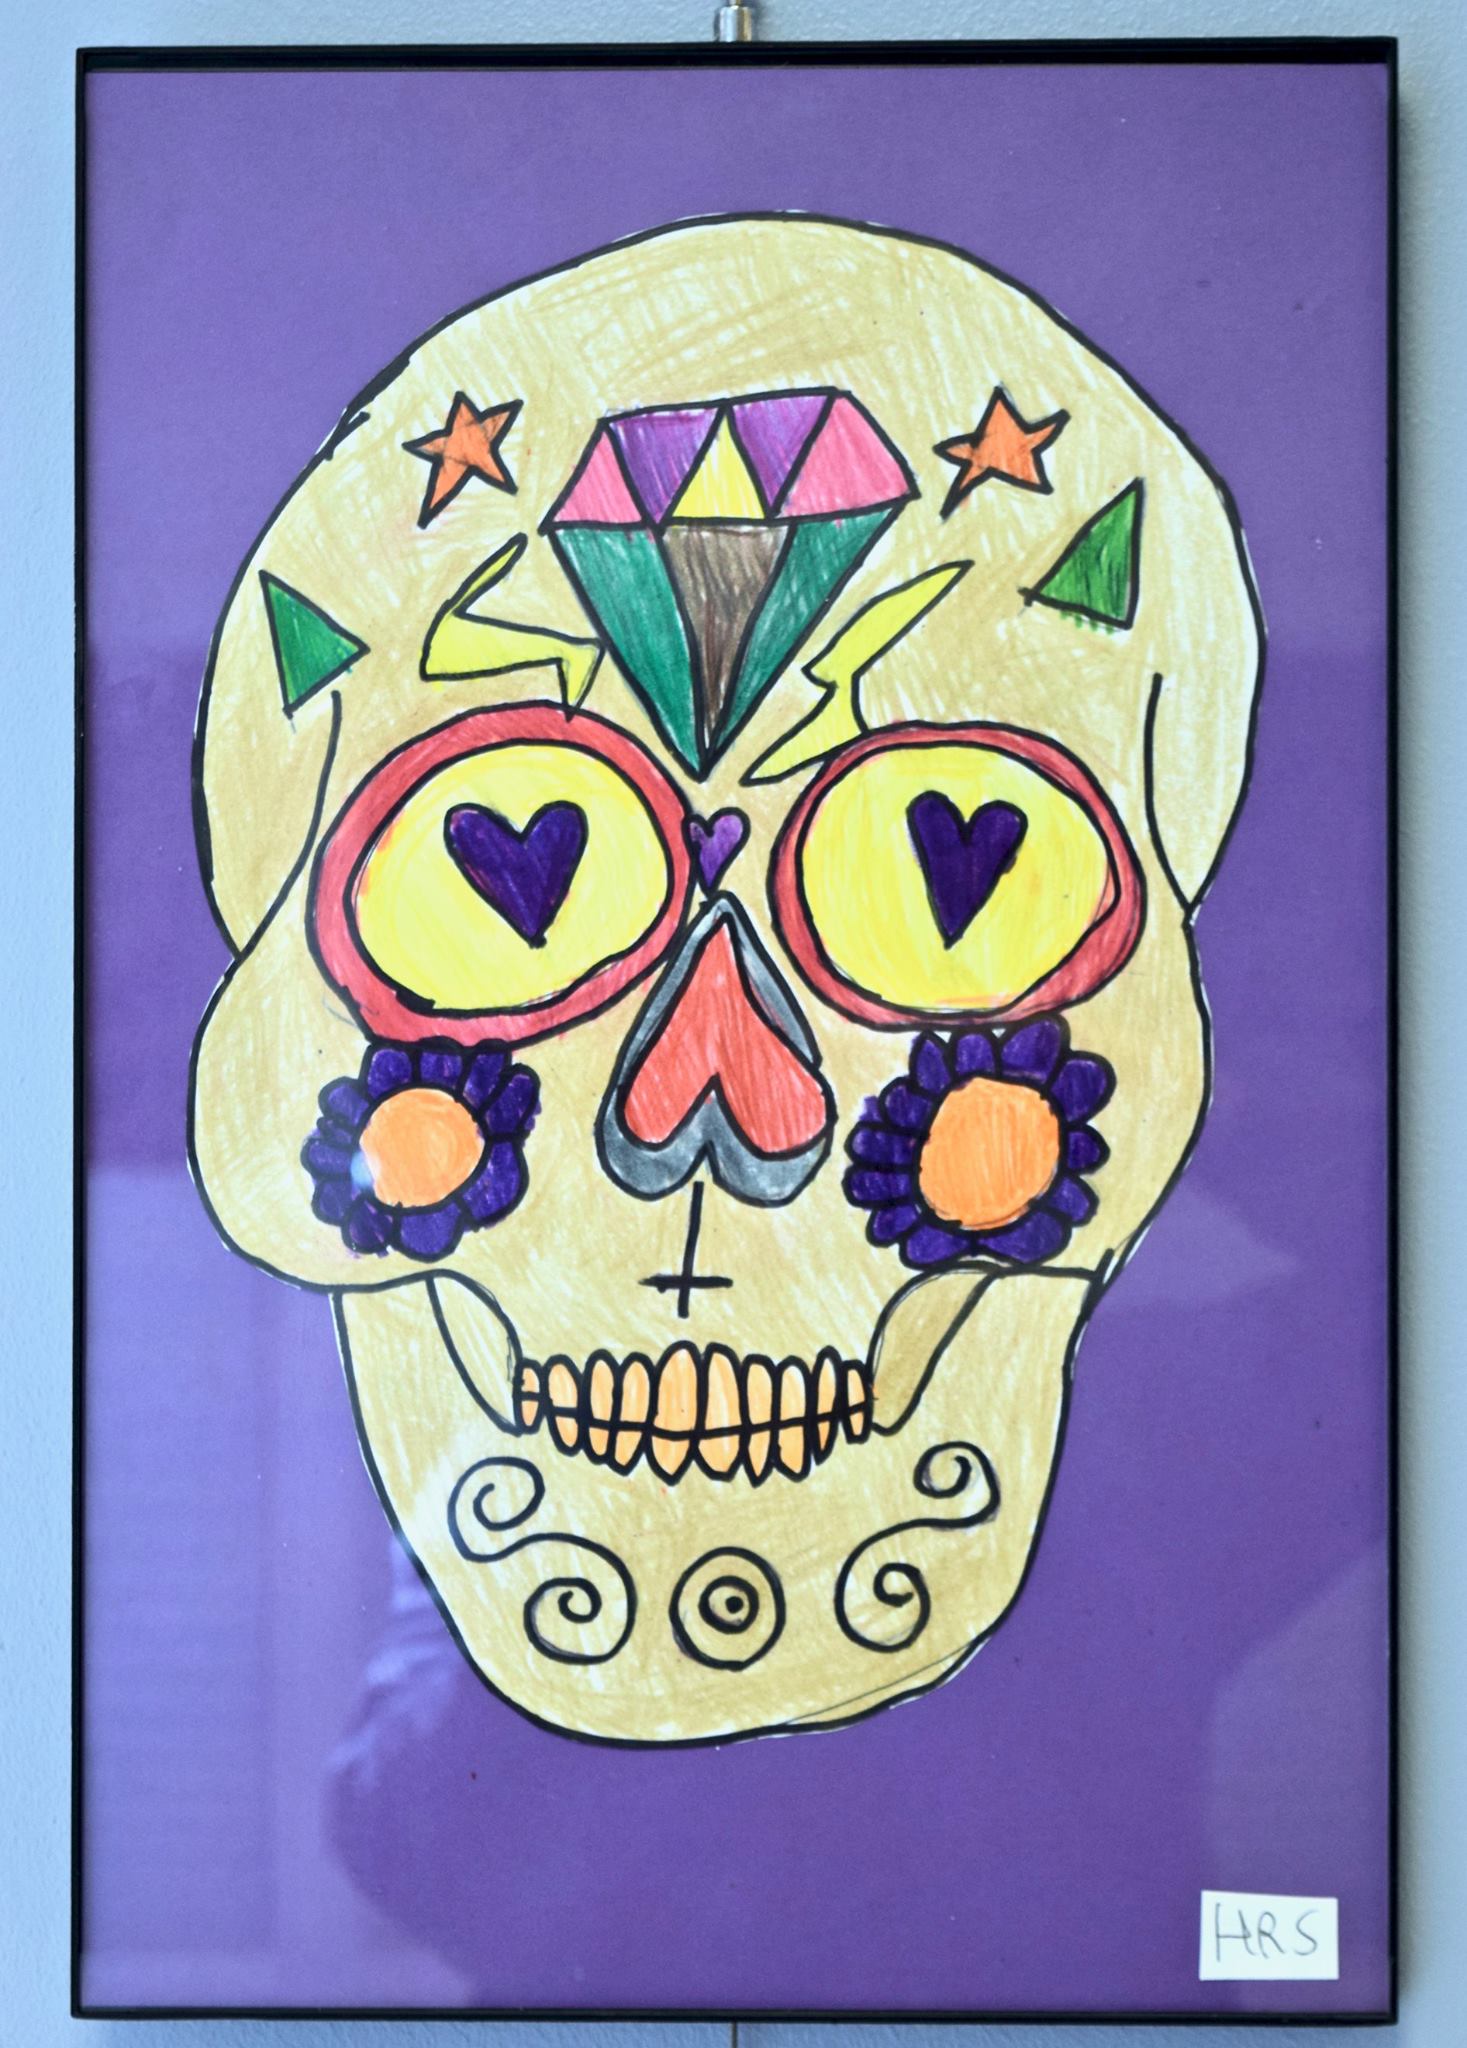 painting of a decorated Day of the Dead skull